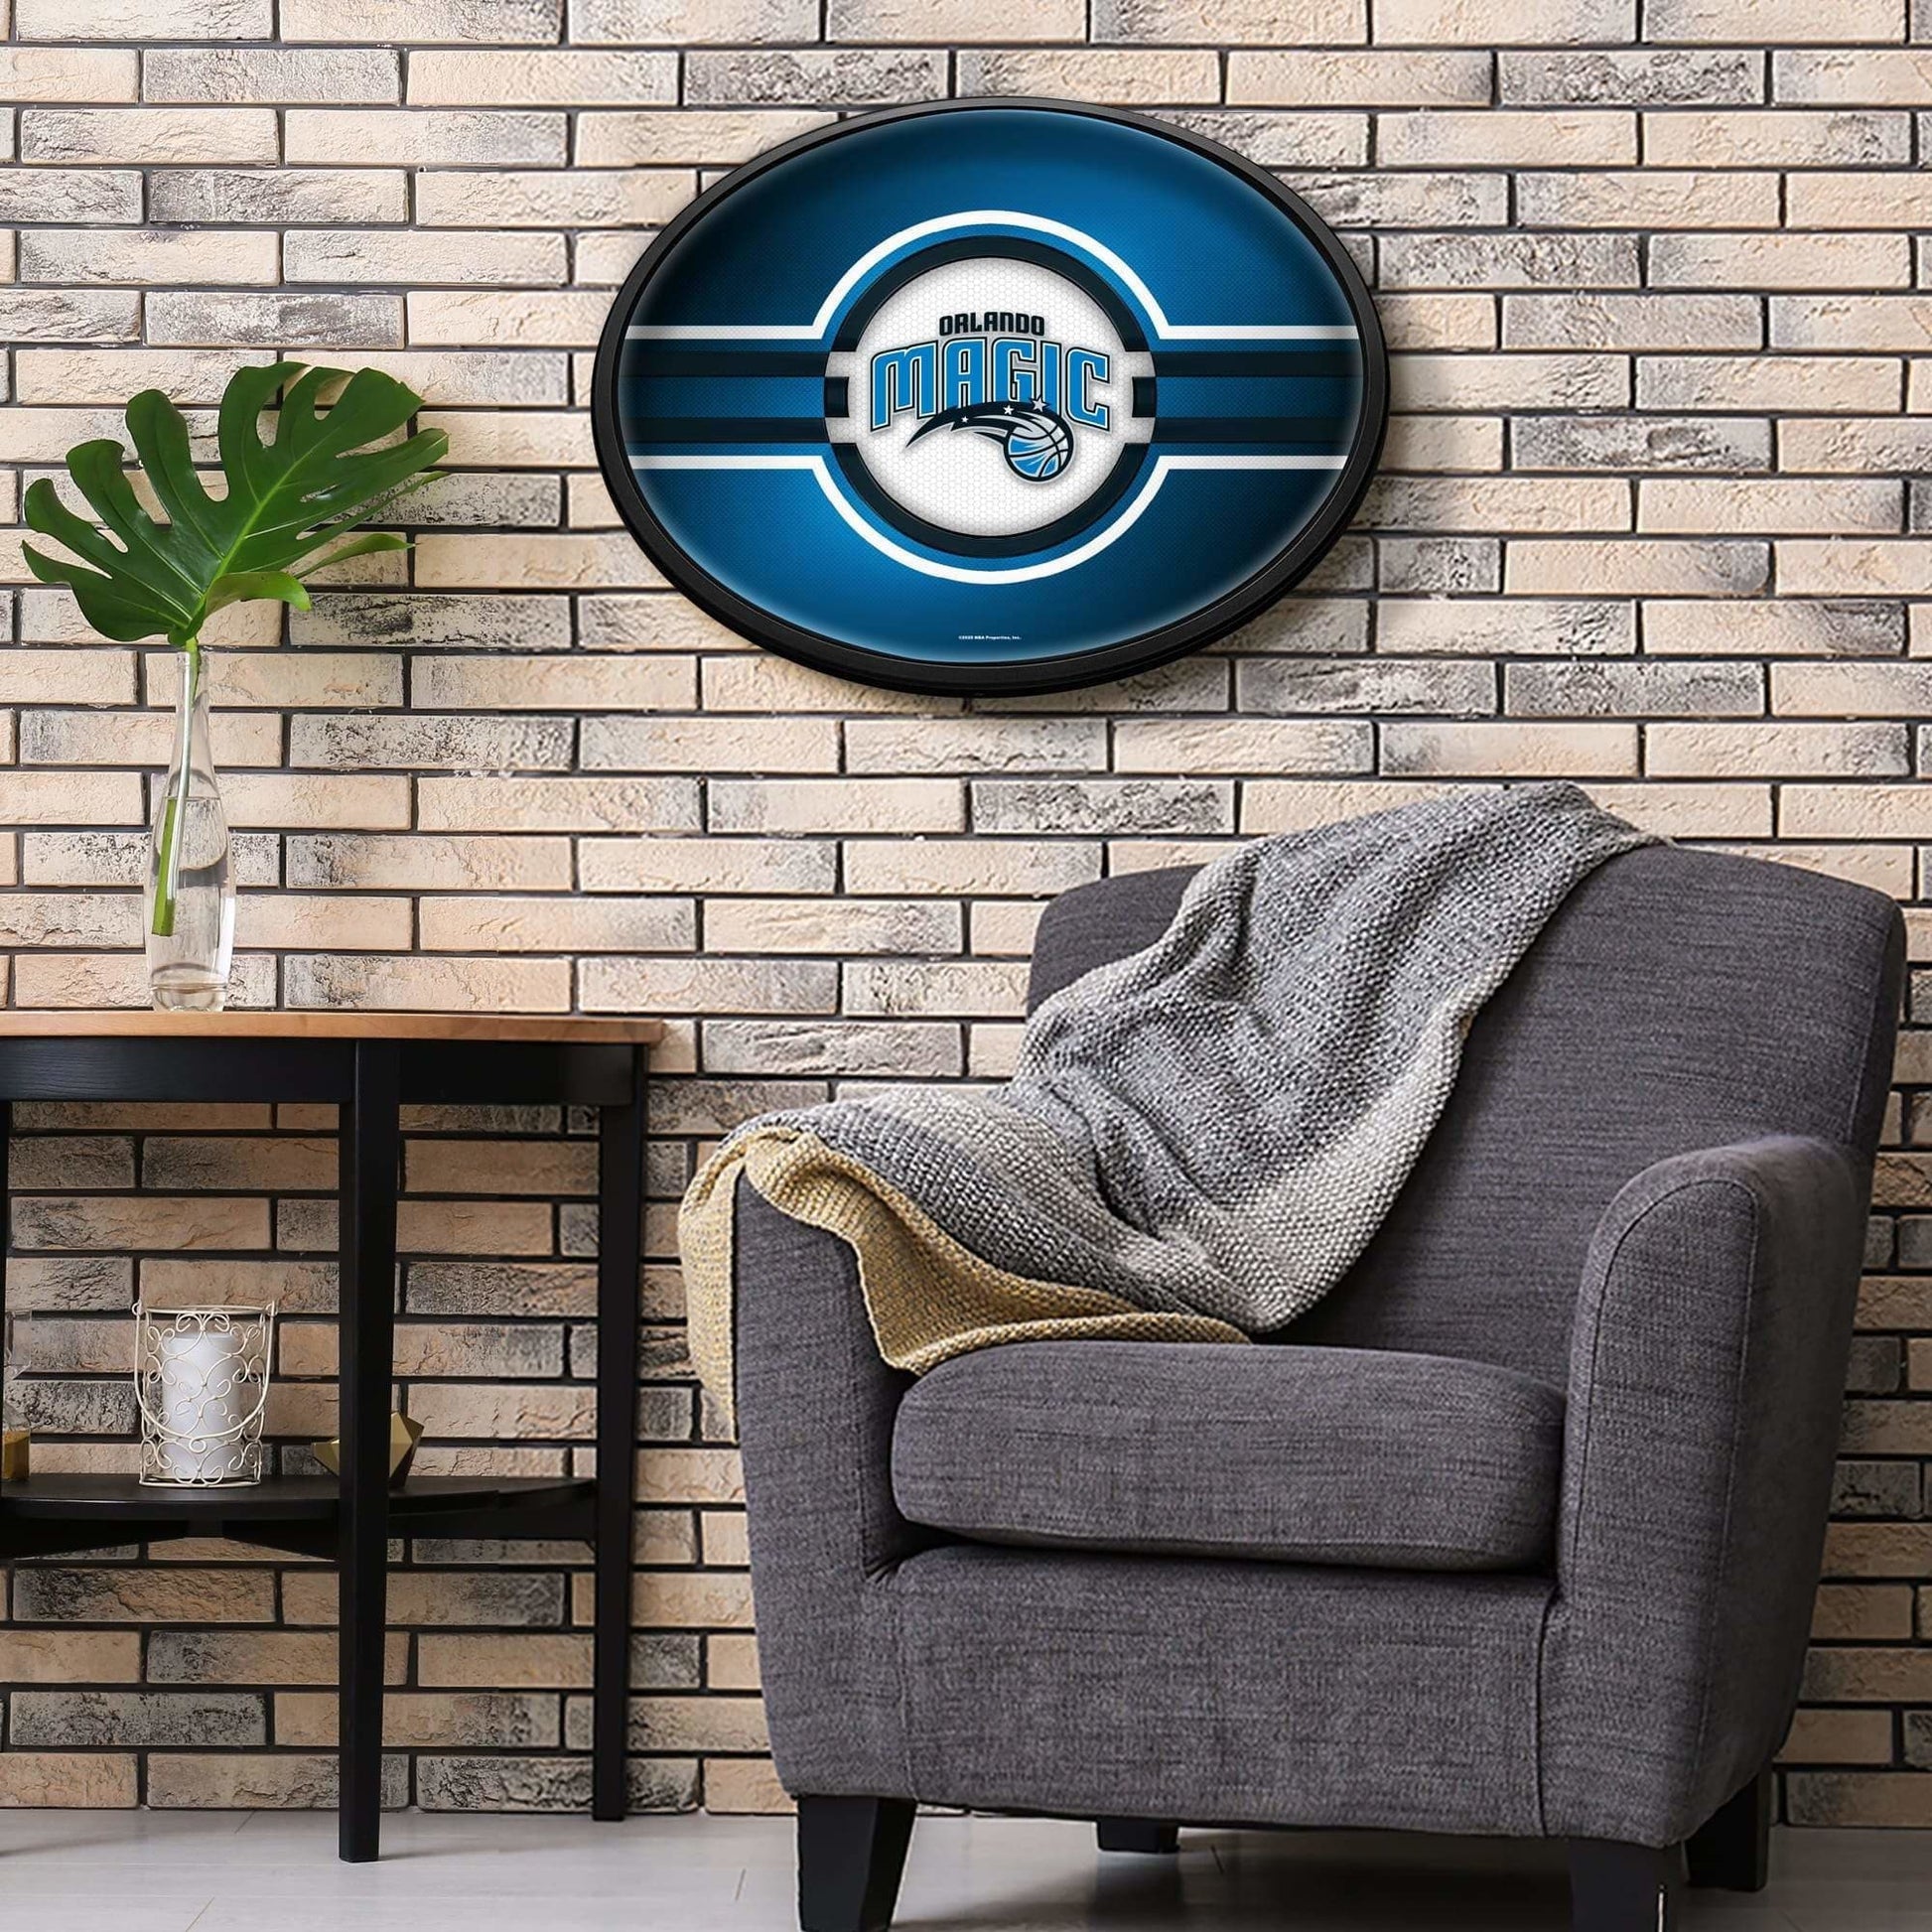 Orlando Magic: Oval Slimline Lighted Wall Sign - The Fan-Brand